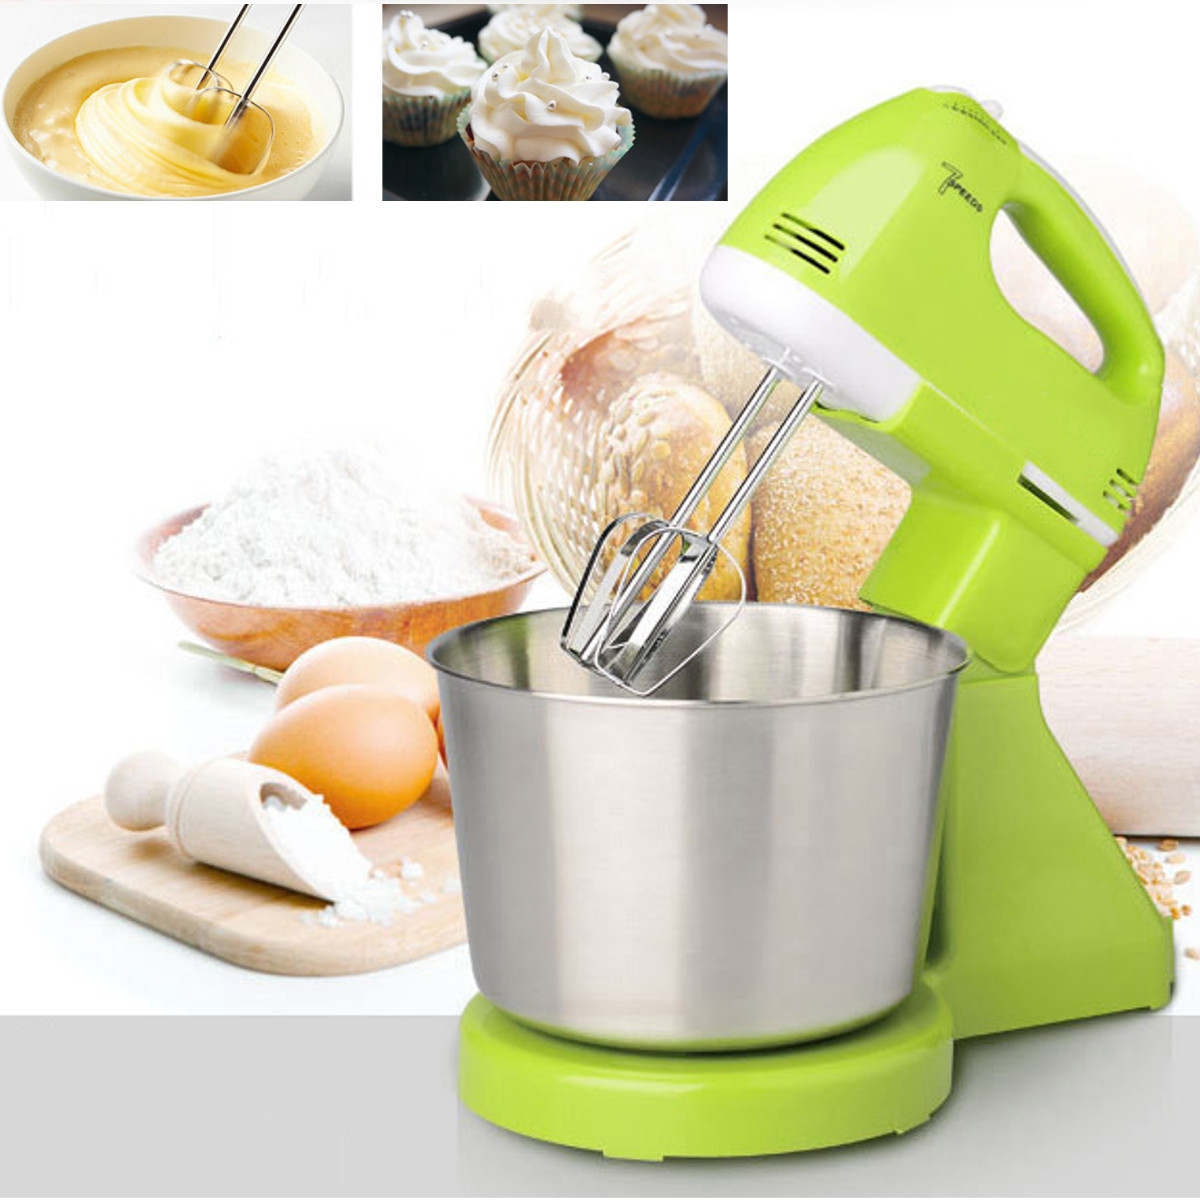 7 Speed Electric Egg Beater Dough Cakes Bread Egg Stand Mixer + Hand Blender + Bowl Food Mixer Kitchen Accessories Egg Tools 19